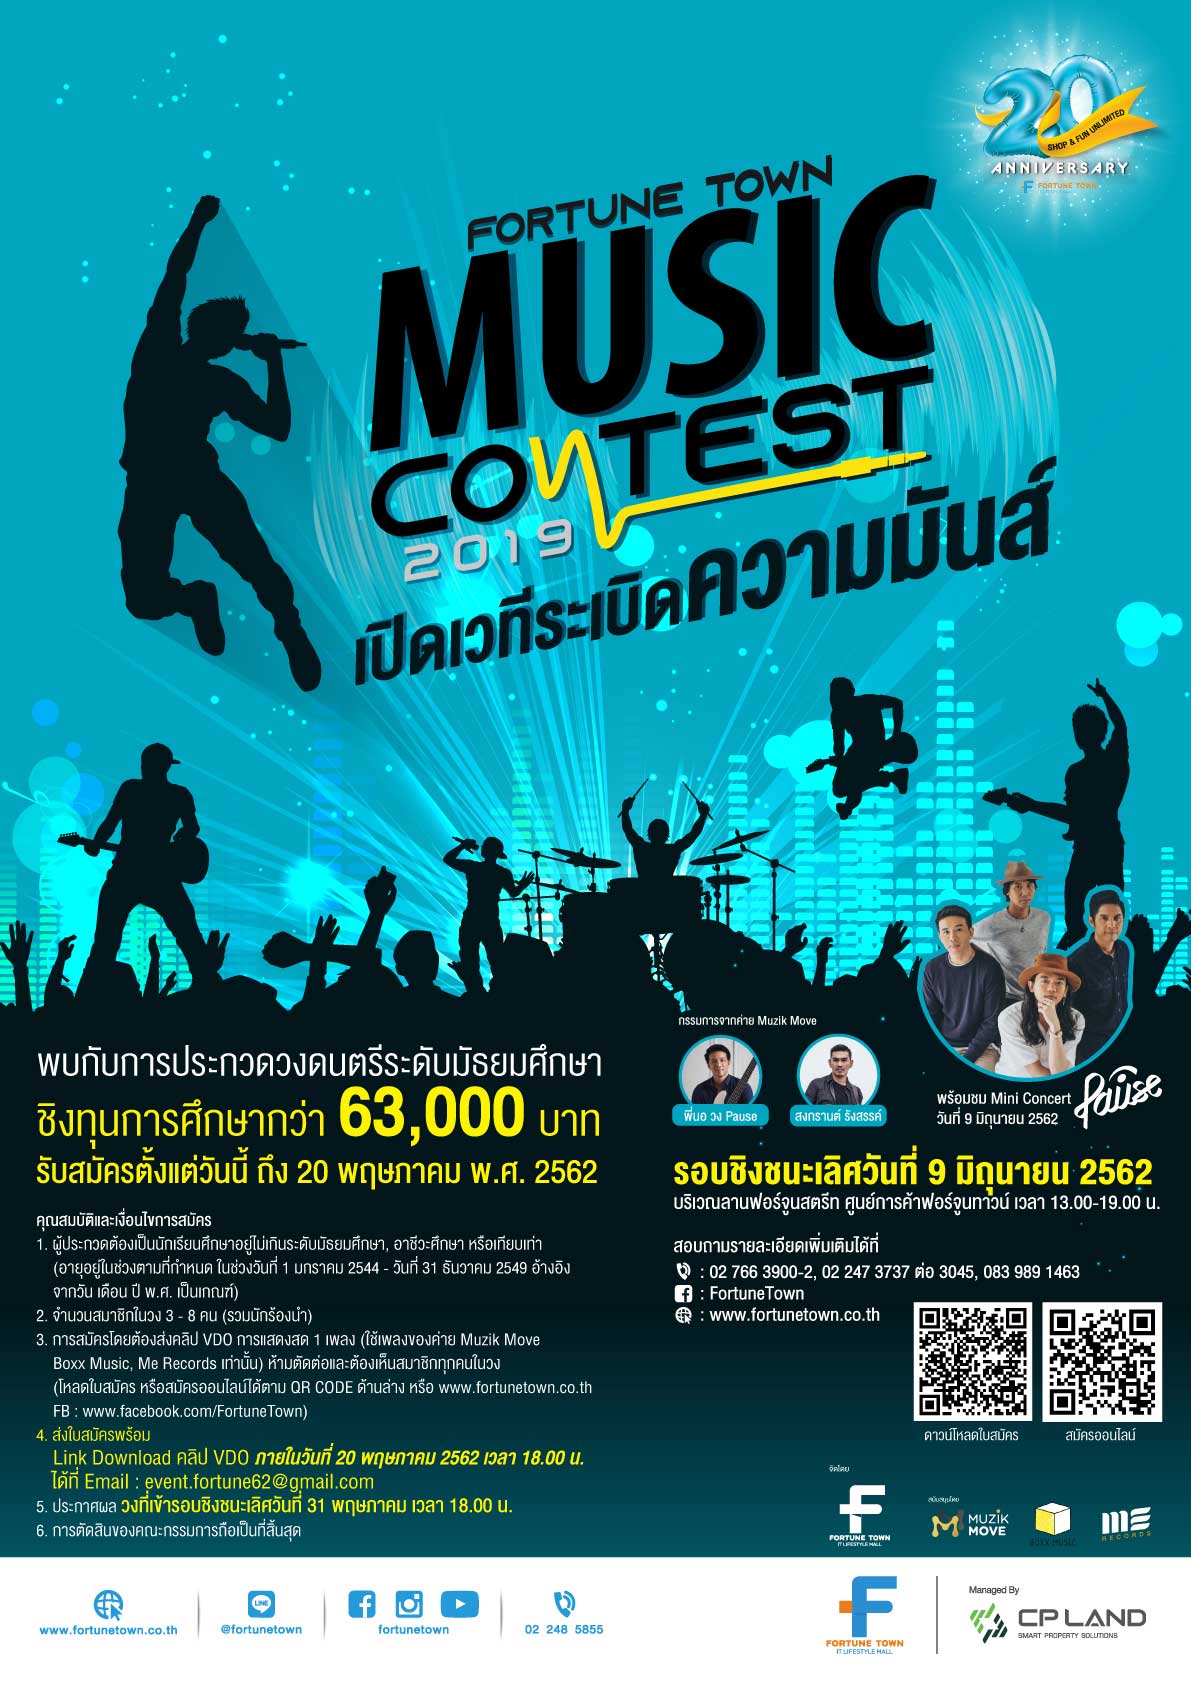 Fortune Town Music Contest 2019